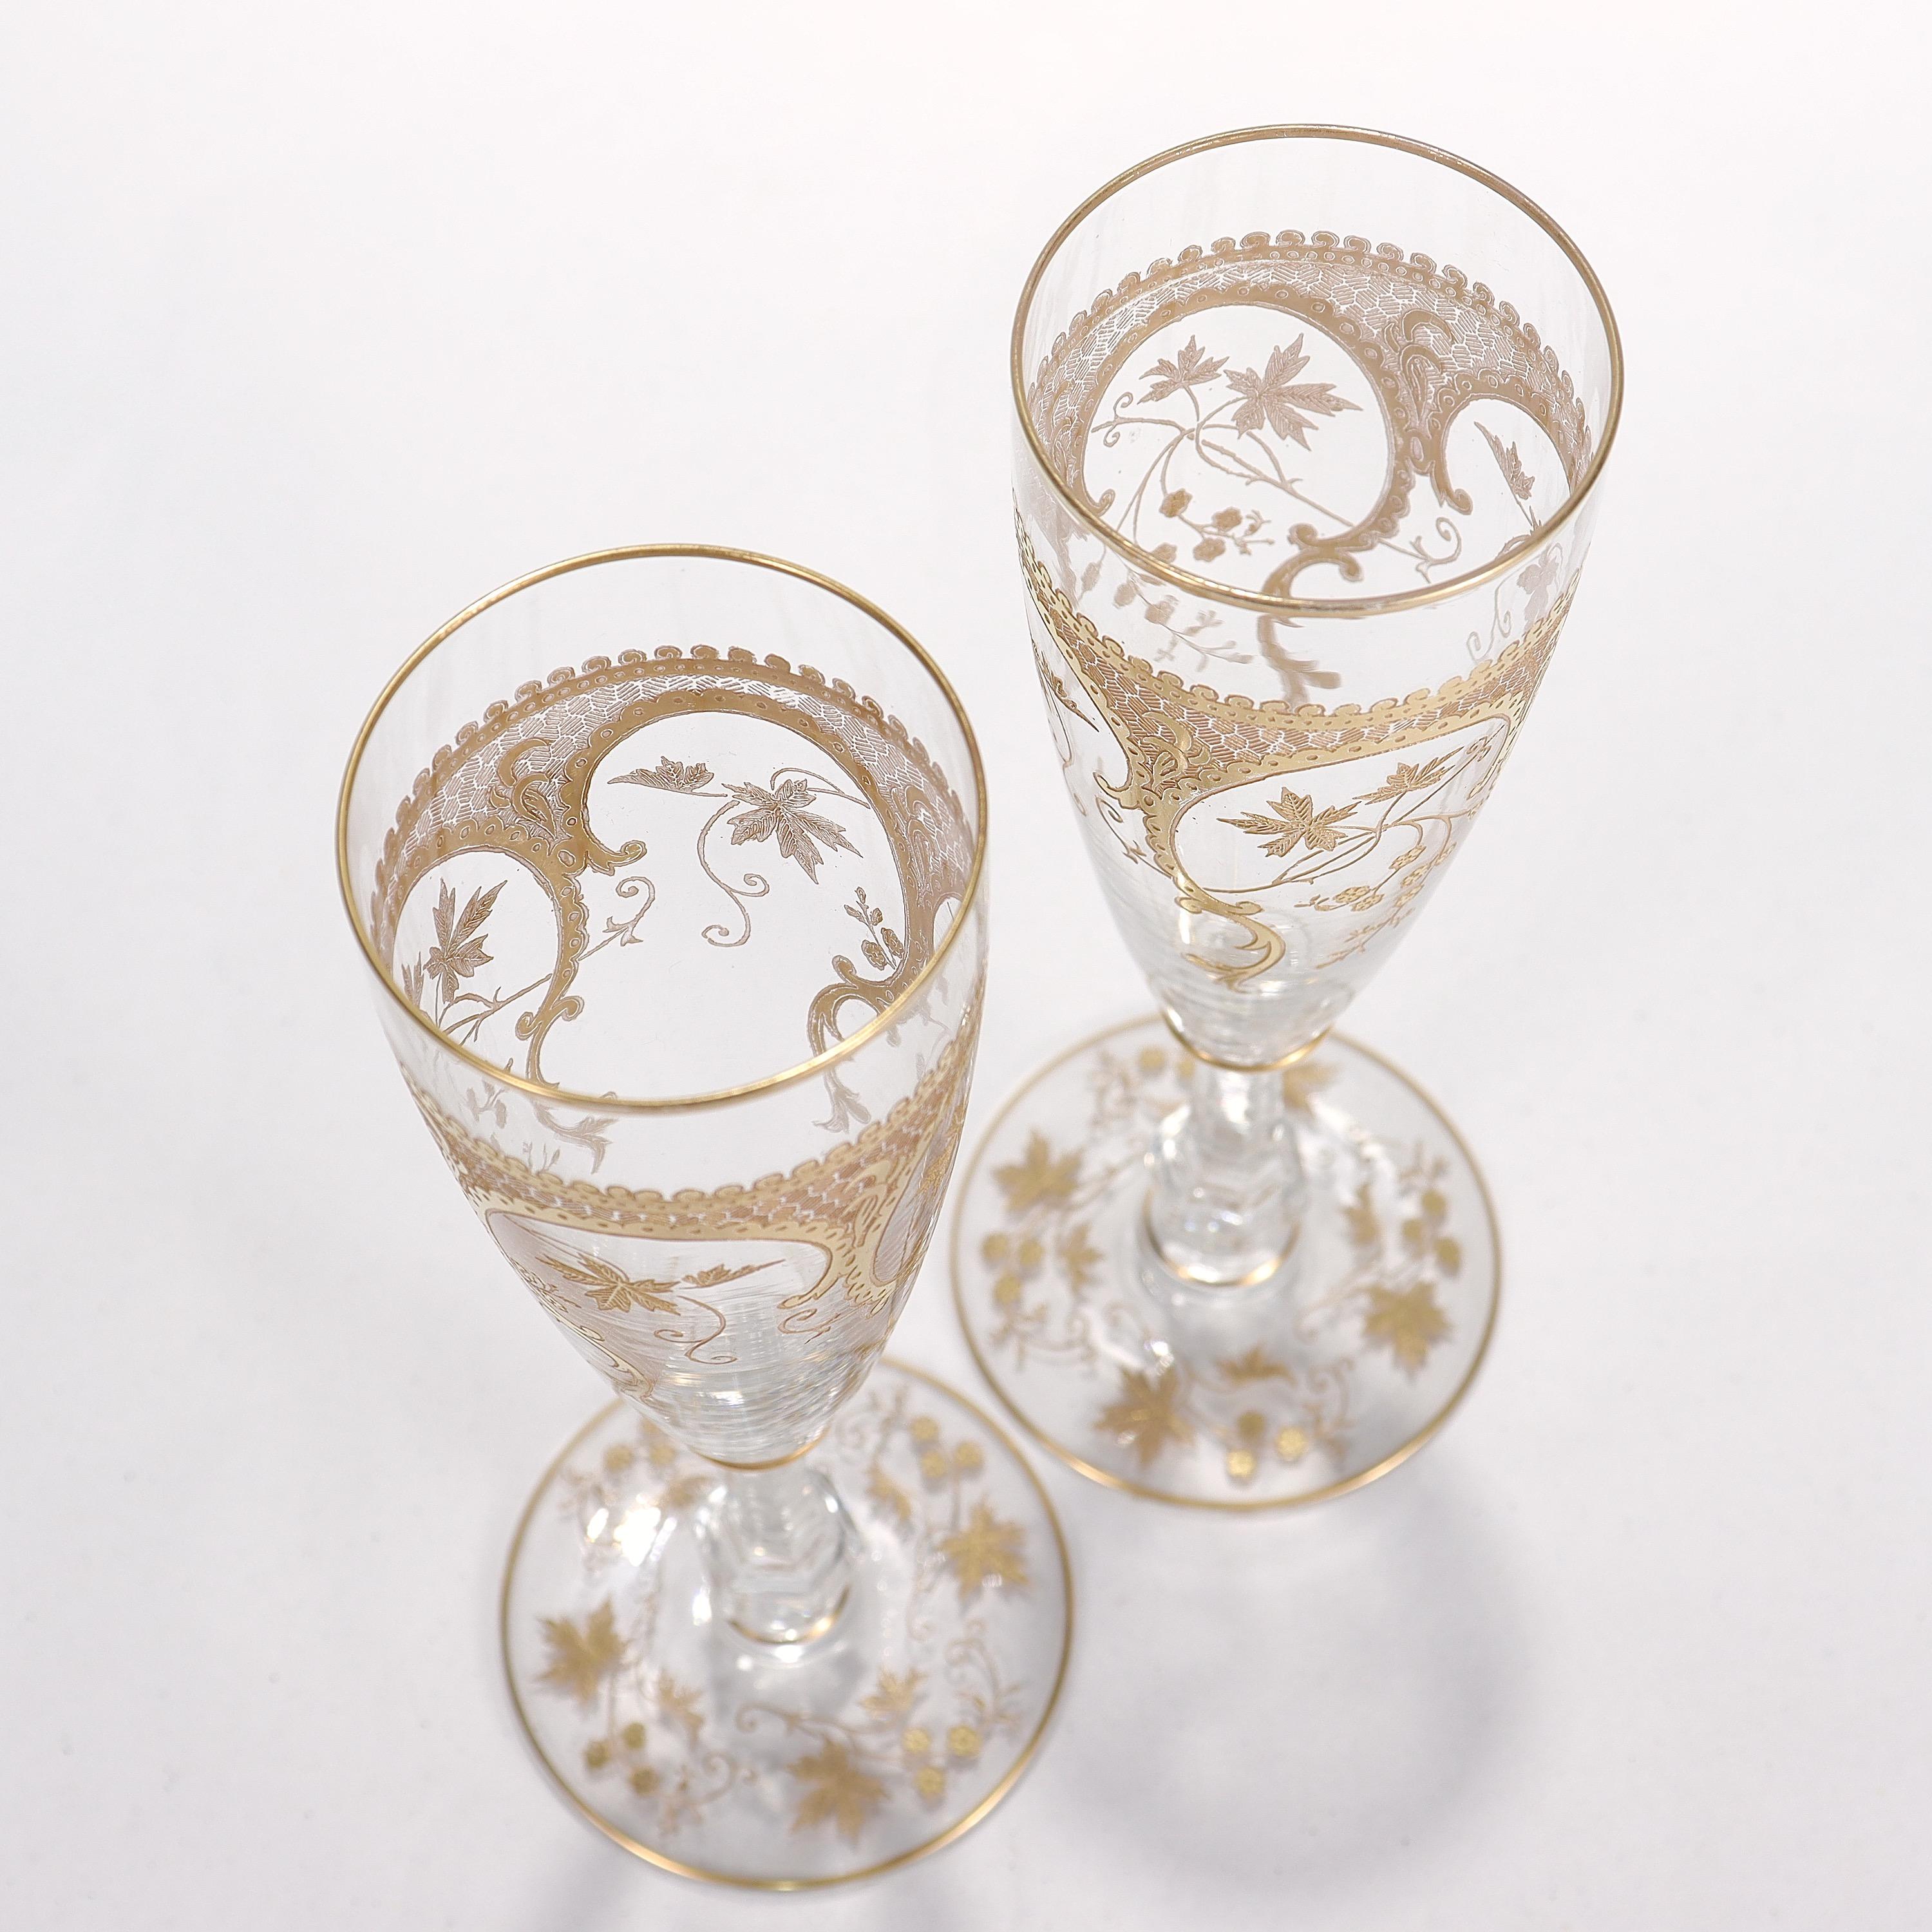 Pair of Richly Gilt Antique Etched & Cut Glass Champagne Stems / Toasting Flutes 3